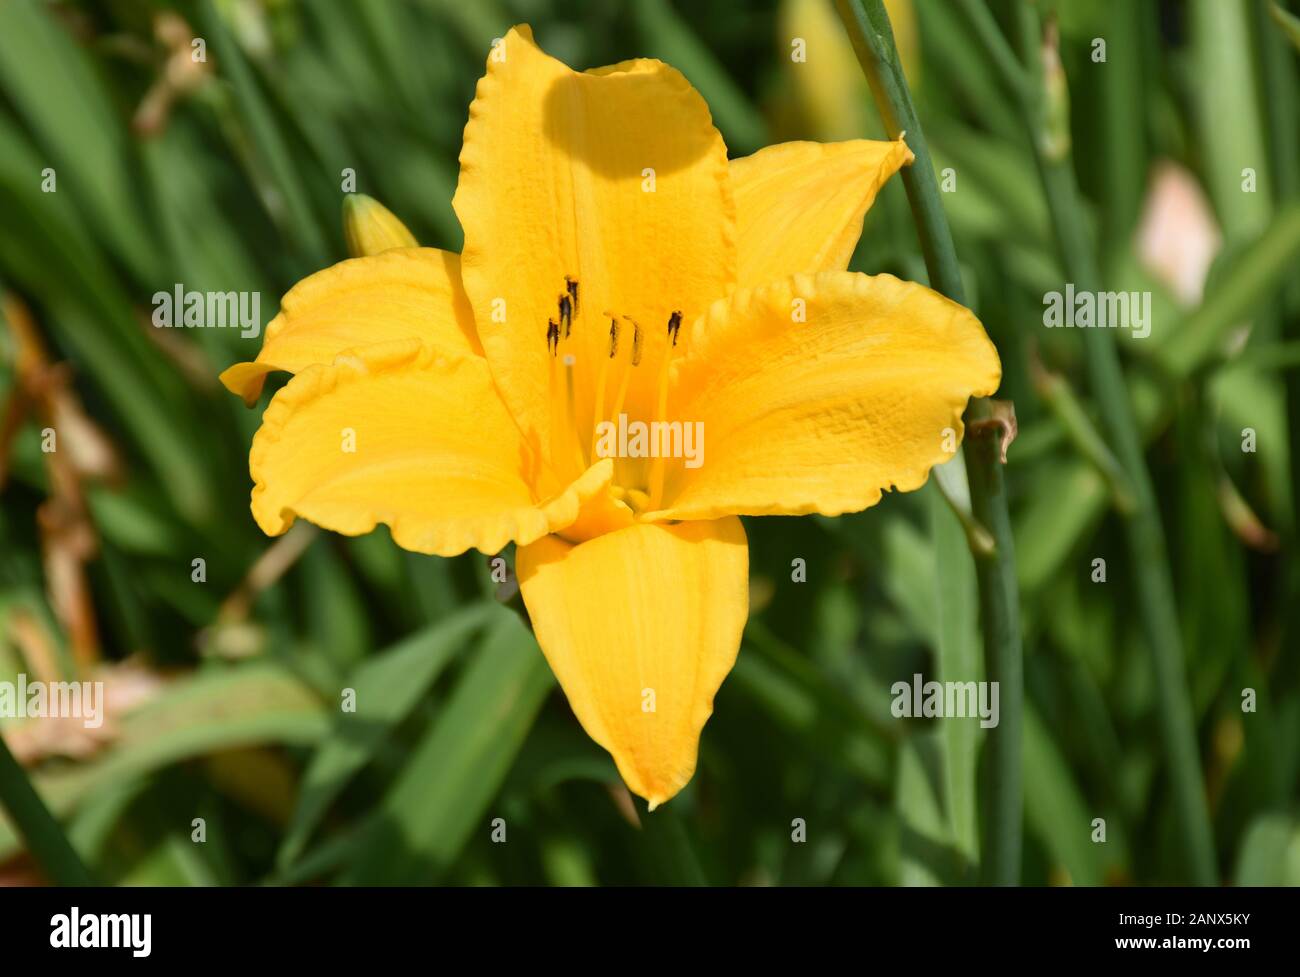 Blooming yellow daylily flower blossom in the sunshine. Stock Photo